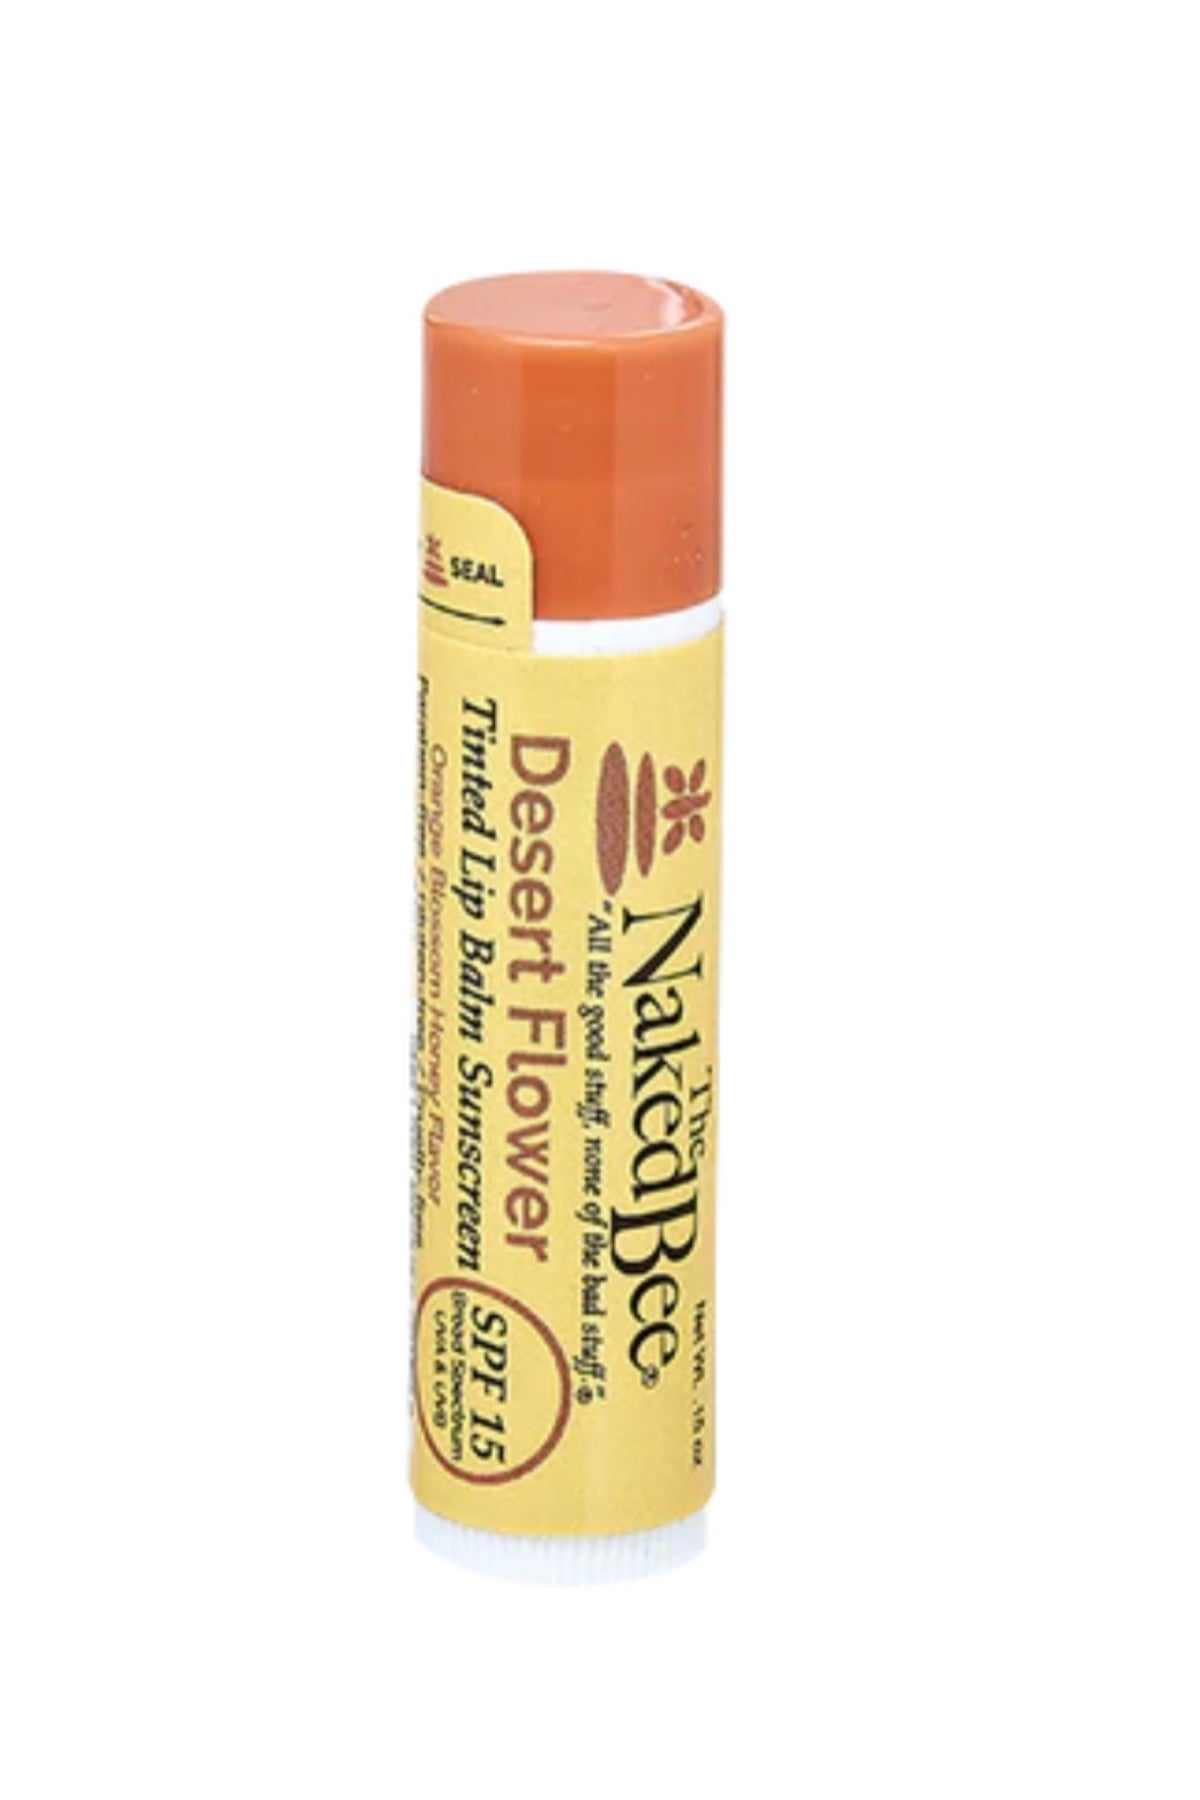 SPF 15 Orange Blossom Honey Tinted Lip Balm in Desert Flower by Naked Bee-Gift-Naked Bee-Gallop 'n Glitz- Women's Western Wear Boutique, Located in Grants Pass, Oregon